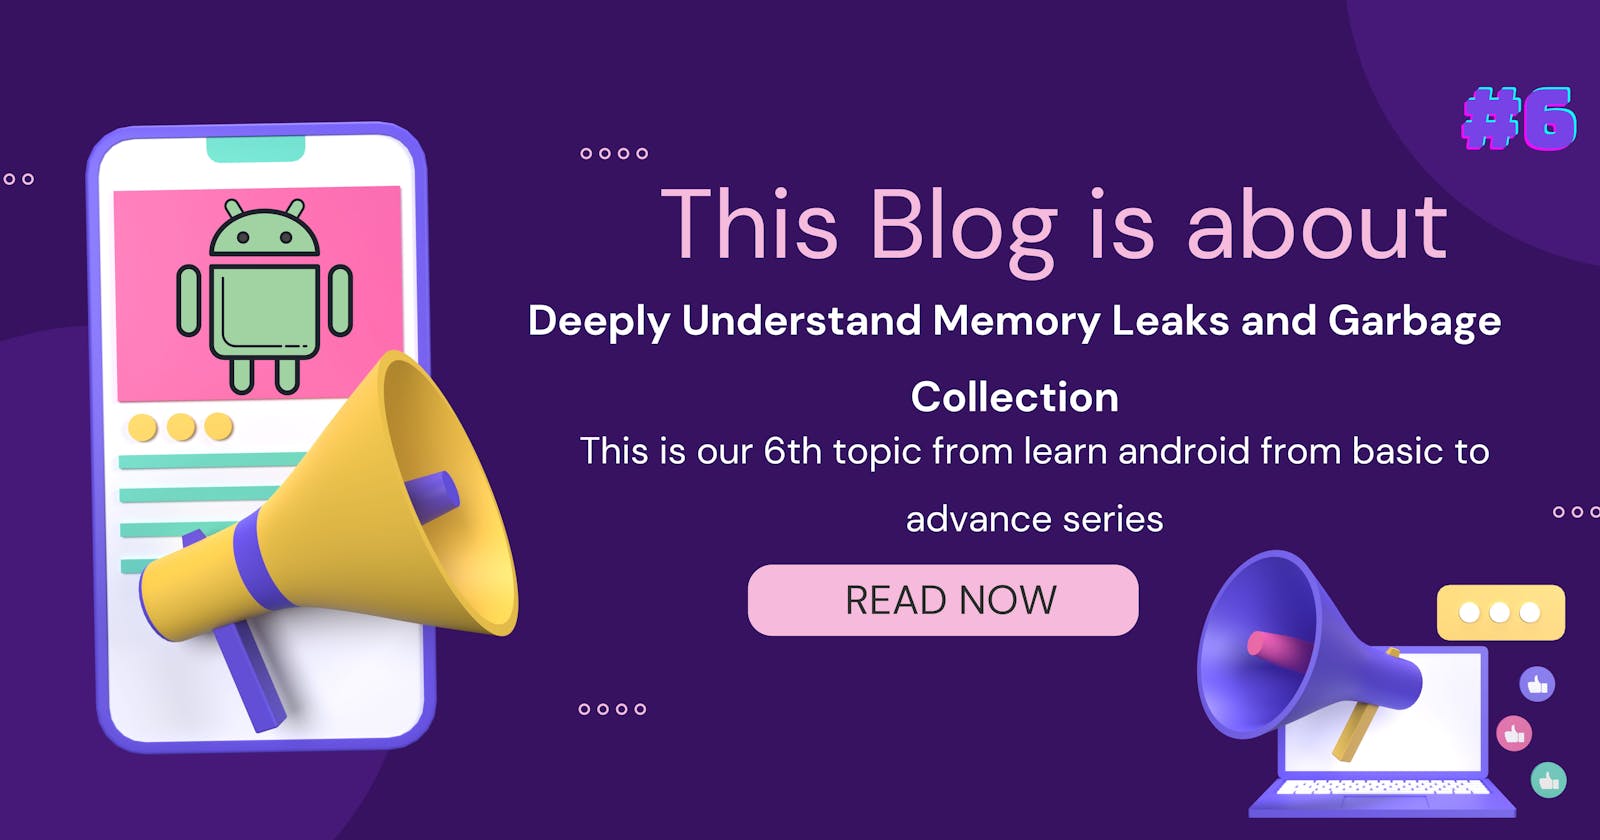 Topic: 6 Deeply Understand Memory Leaks and Garbage Collection